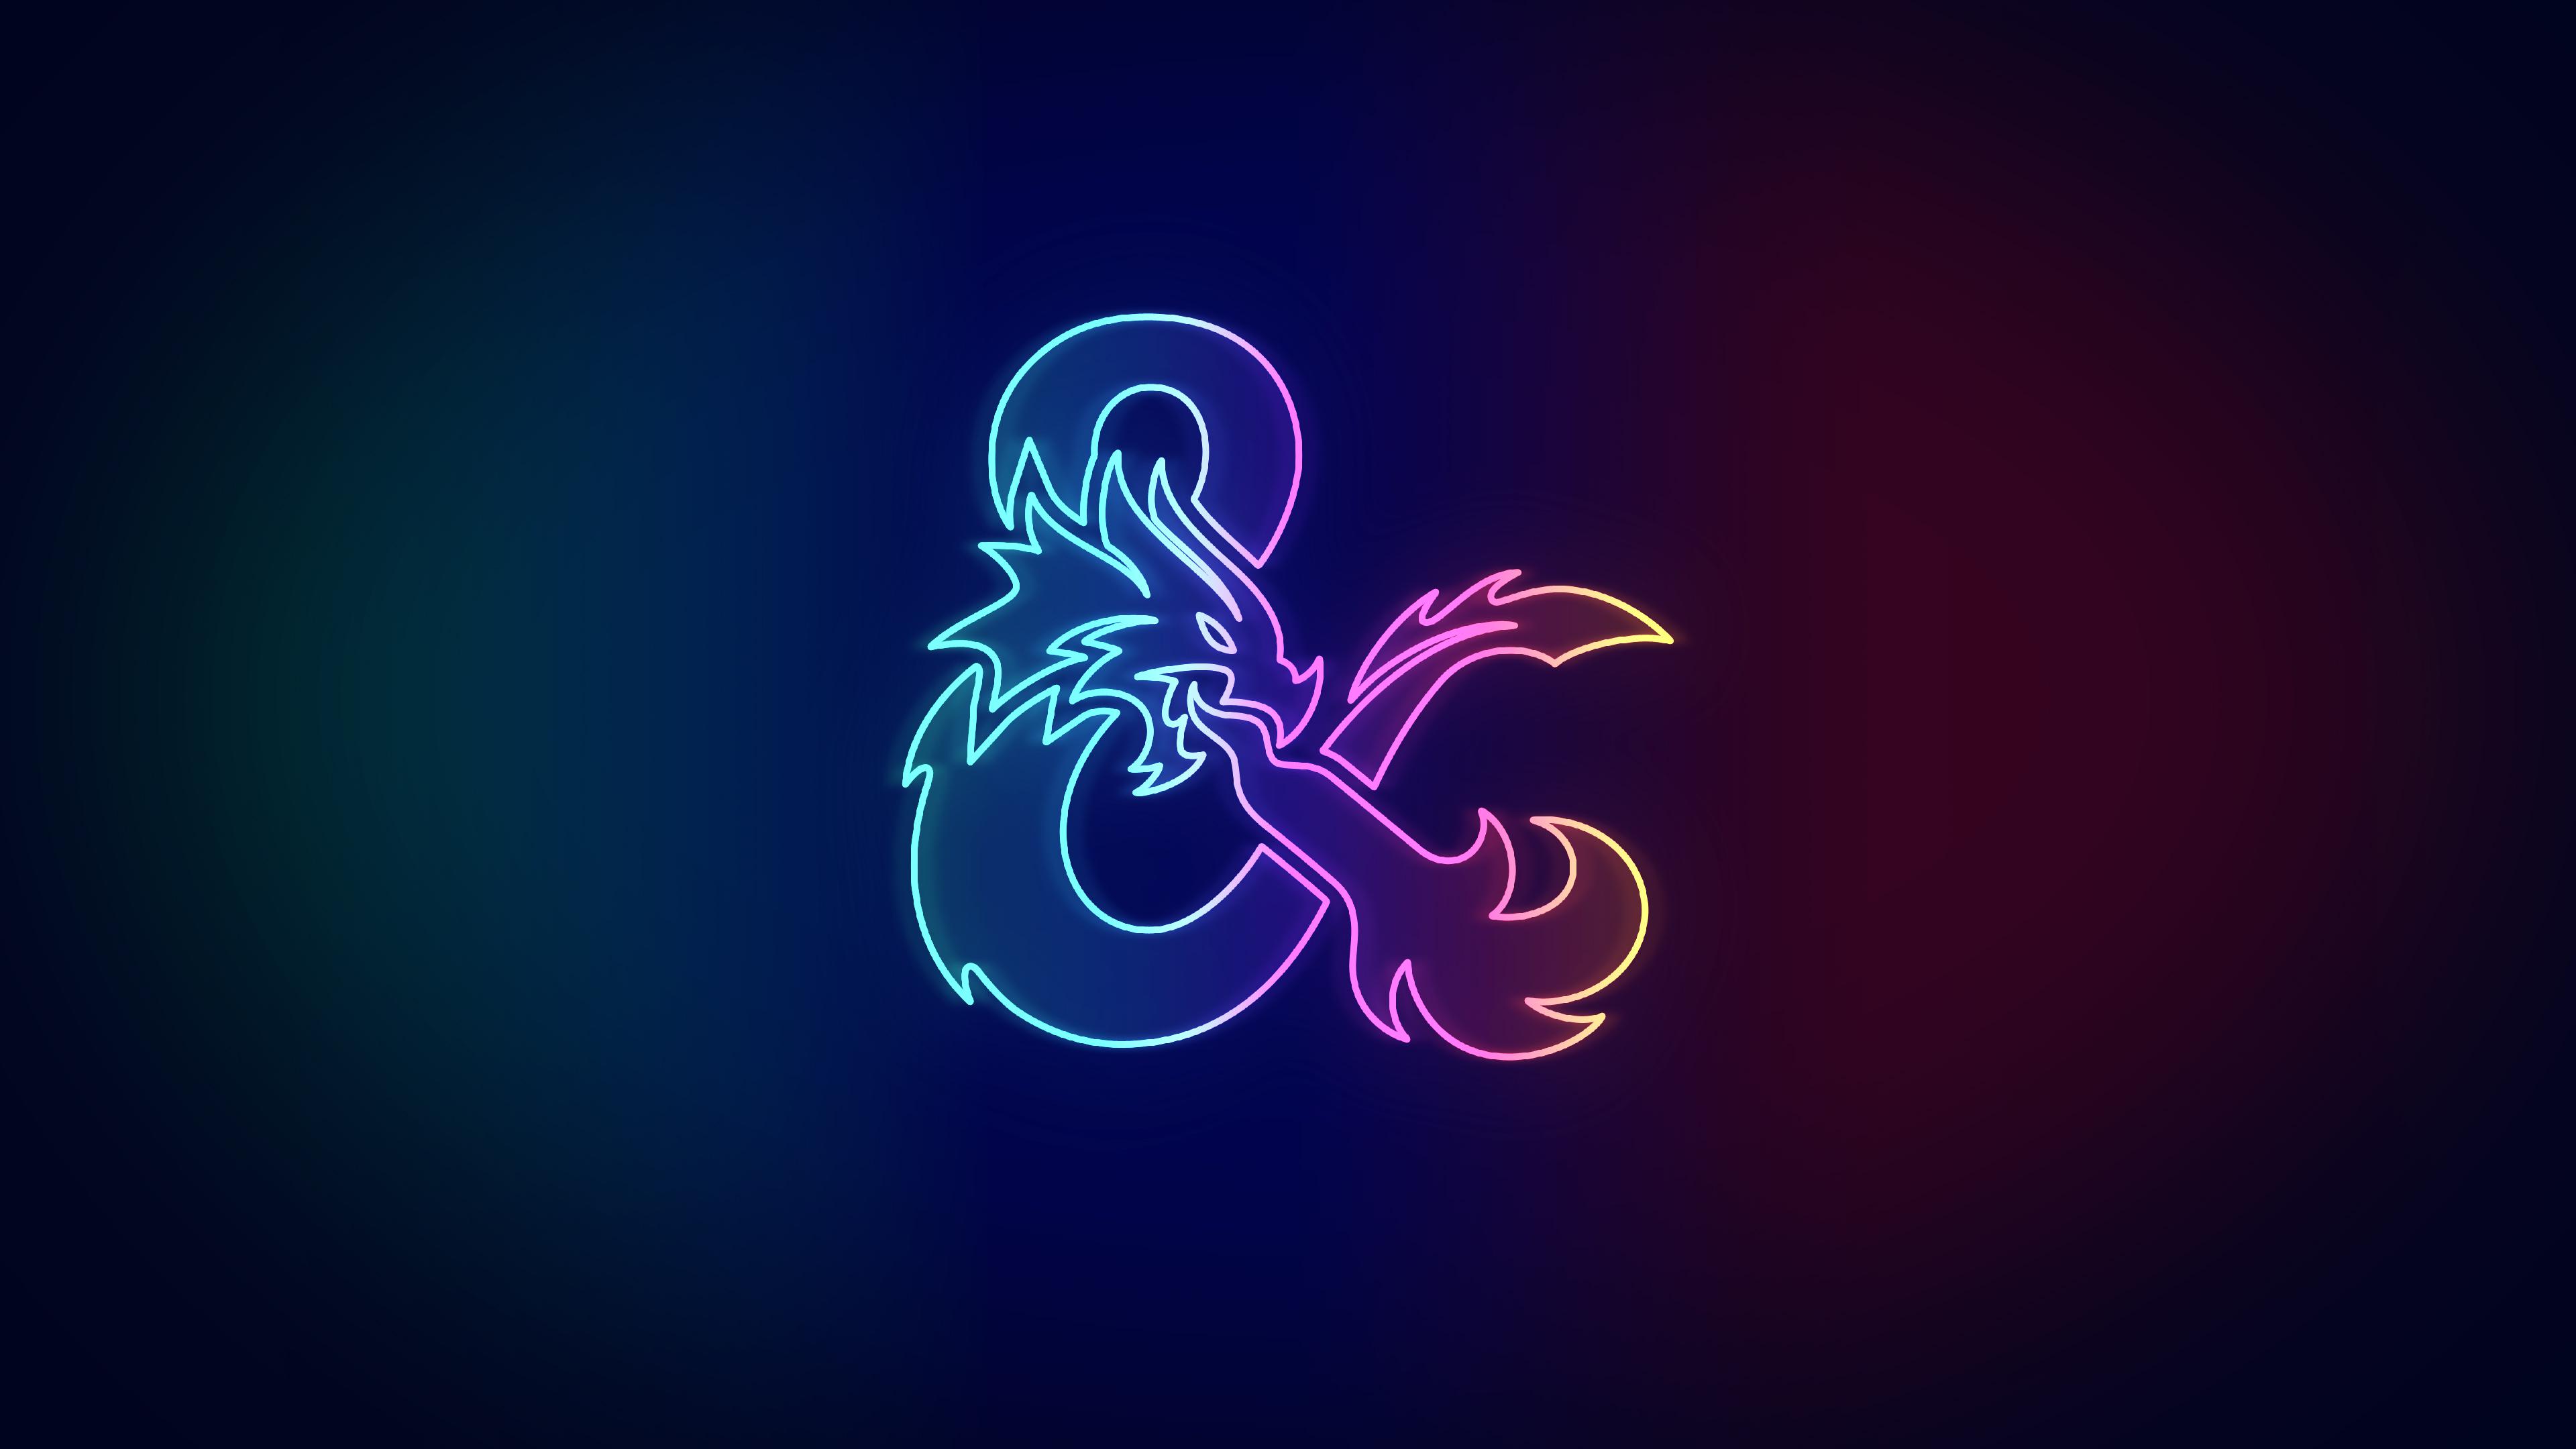 Neon Dungeons and Dragons Wallpaper [3840 x 2160]